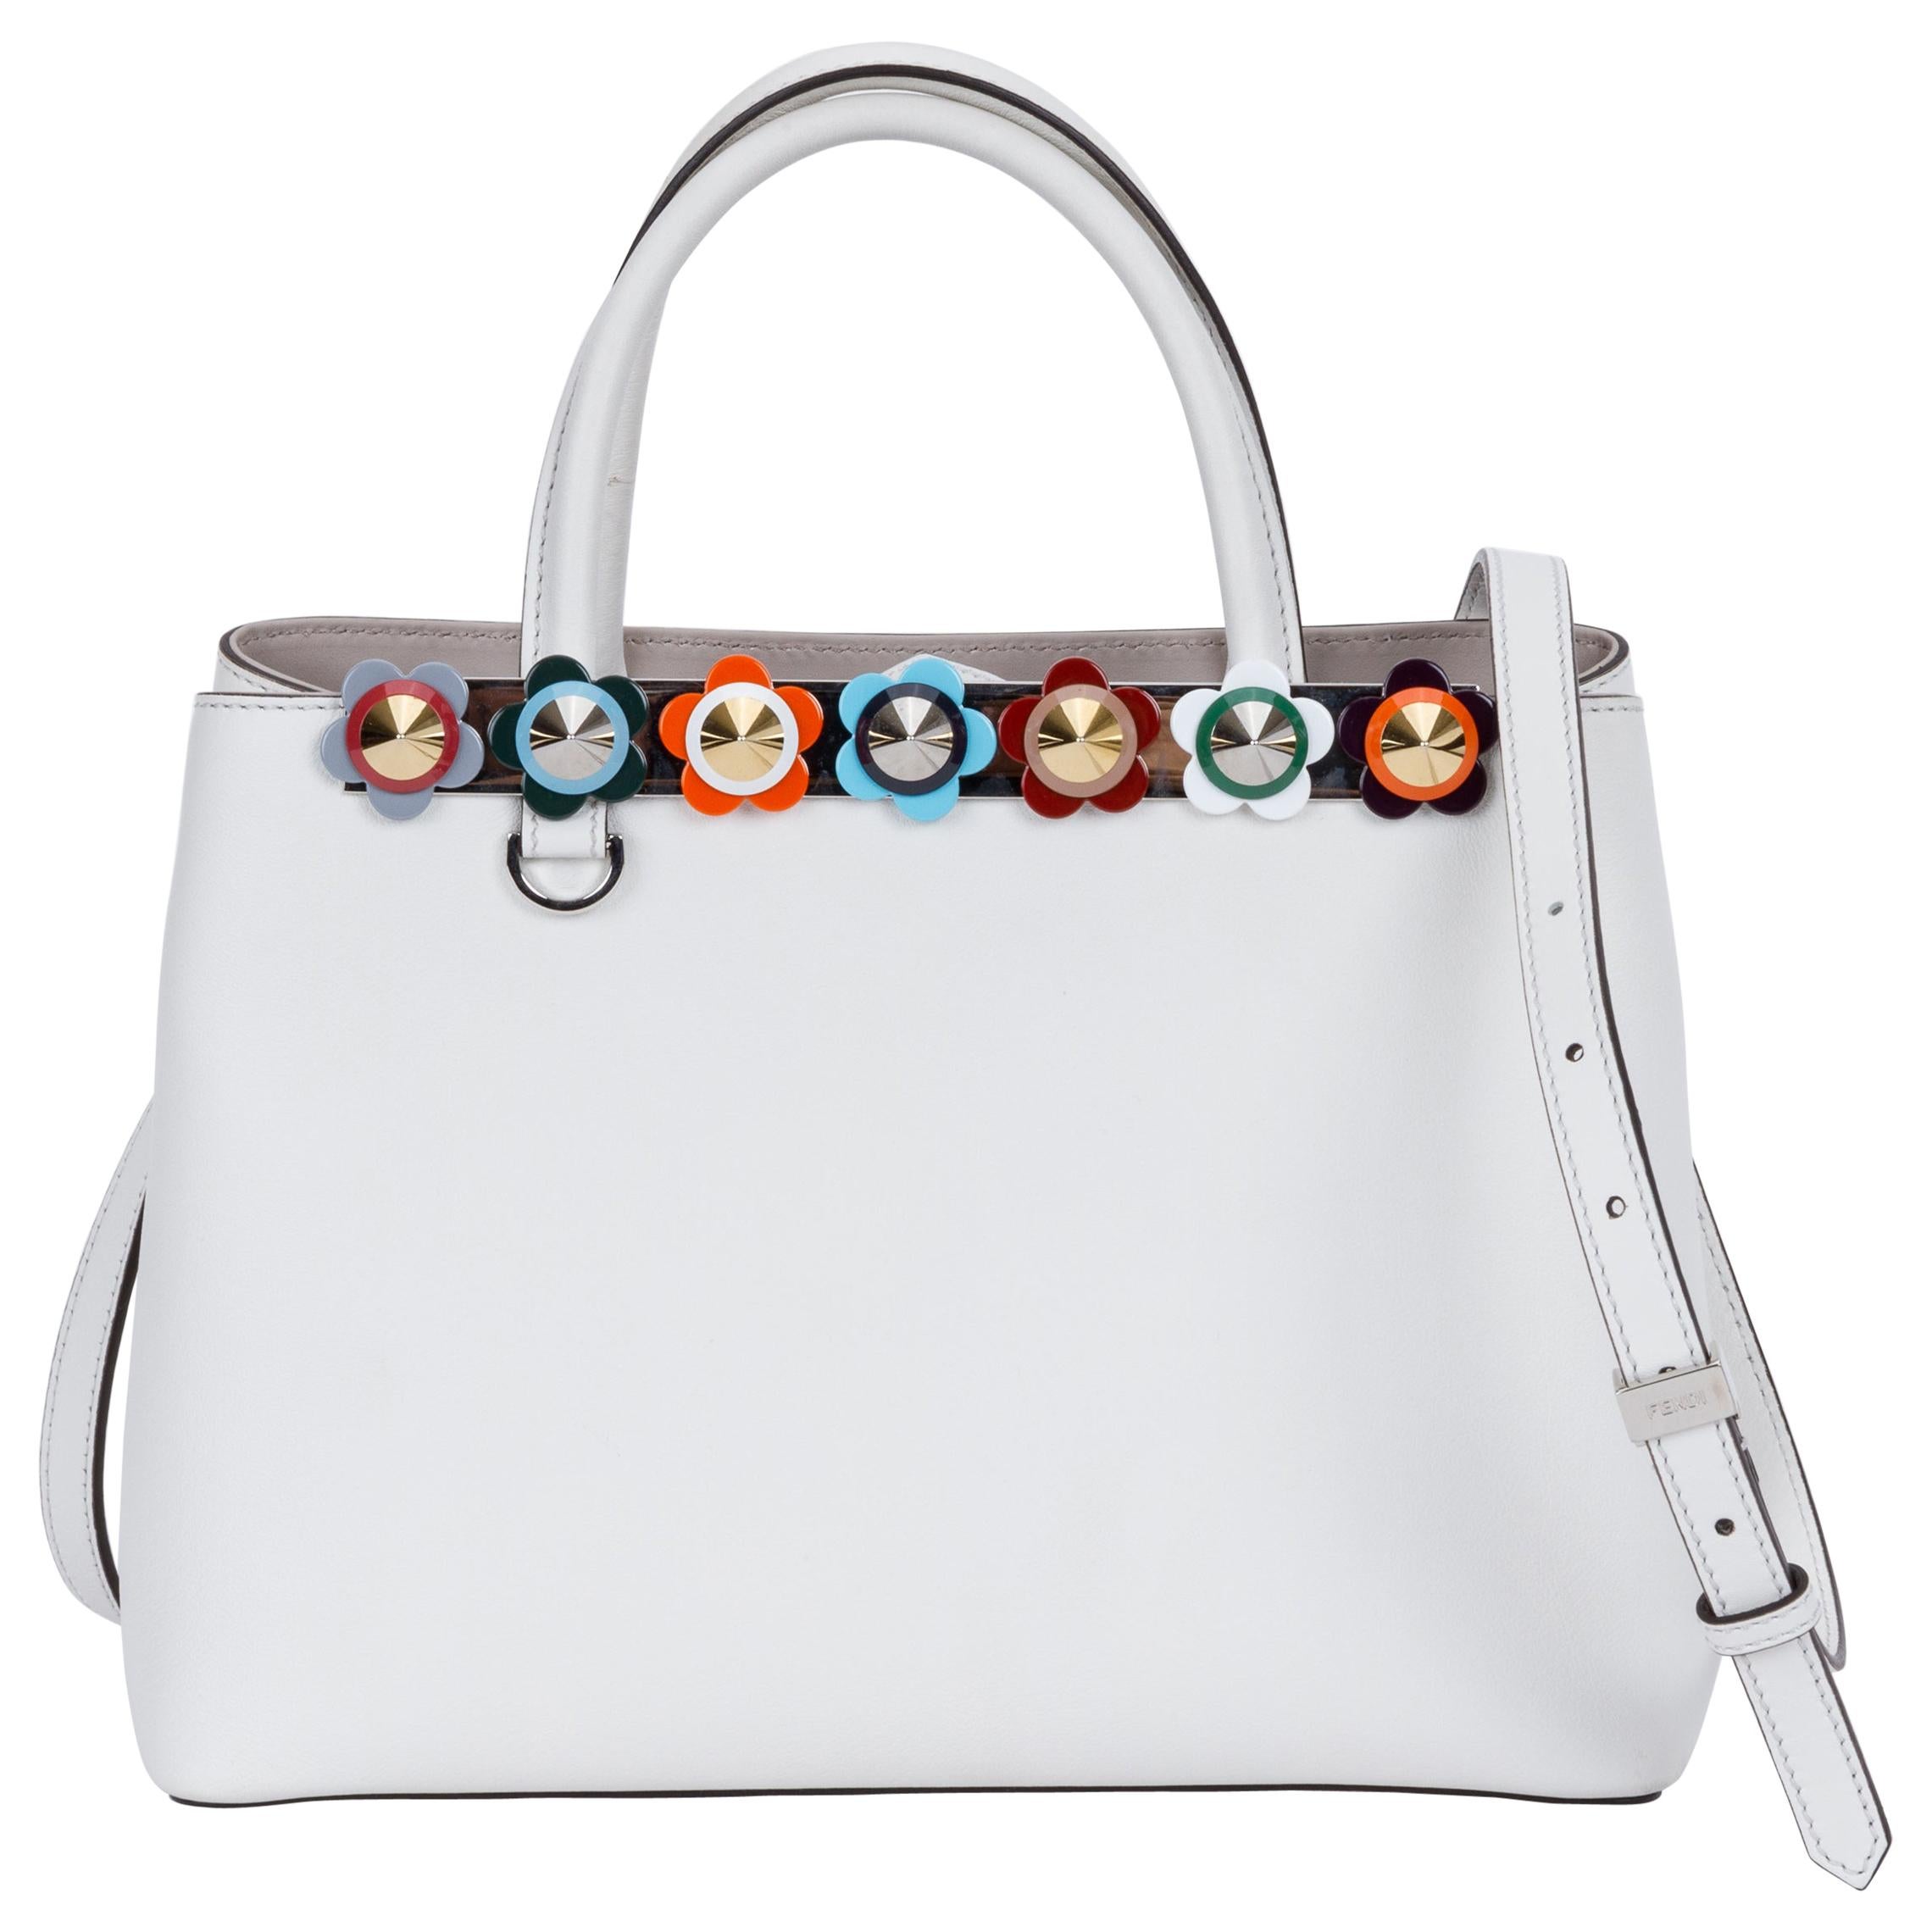 New in Box Fendi White Leather Handbag with Colored Flowers